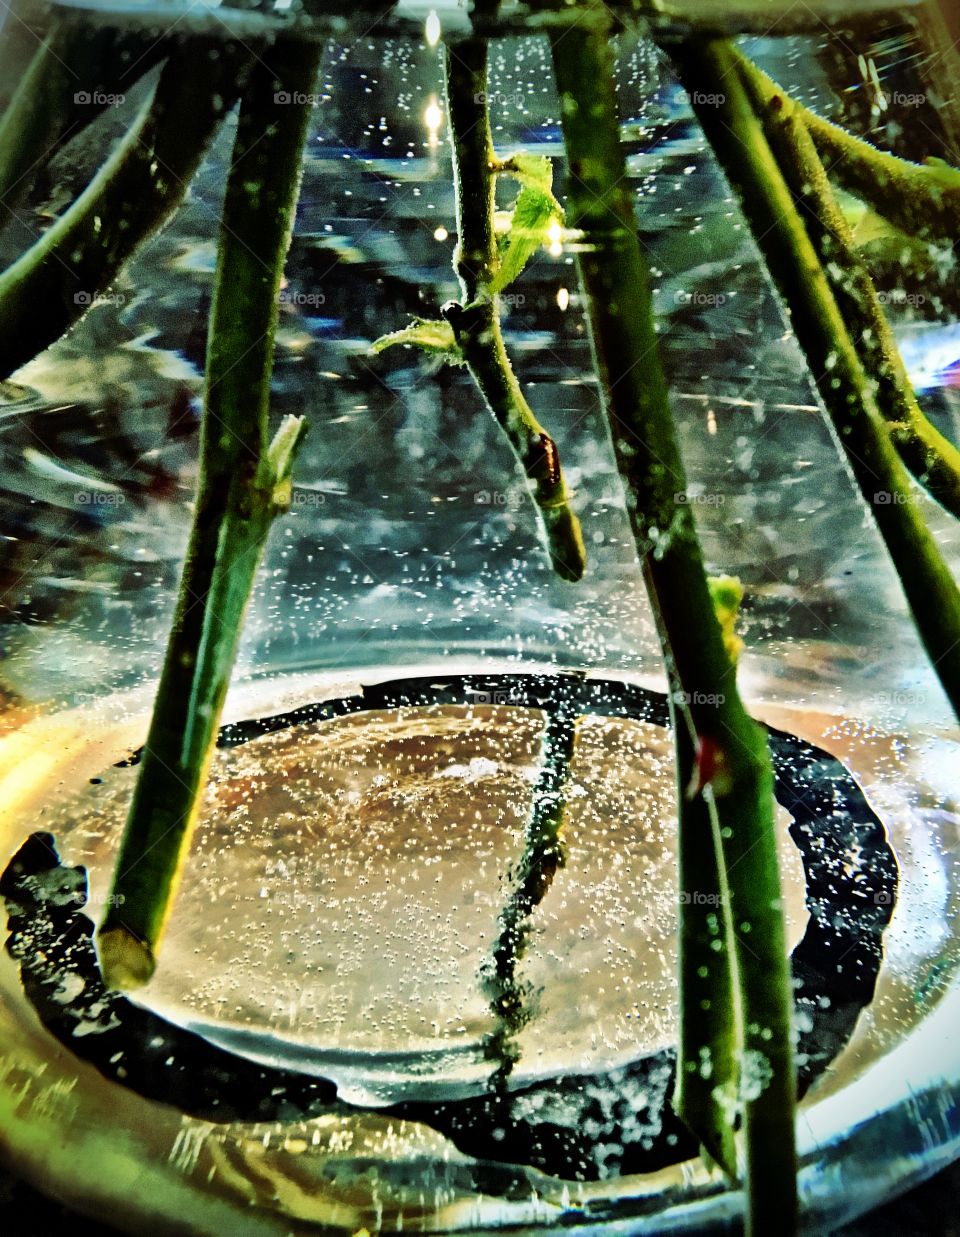 Rose stems in water